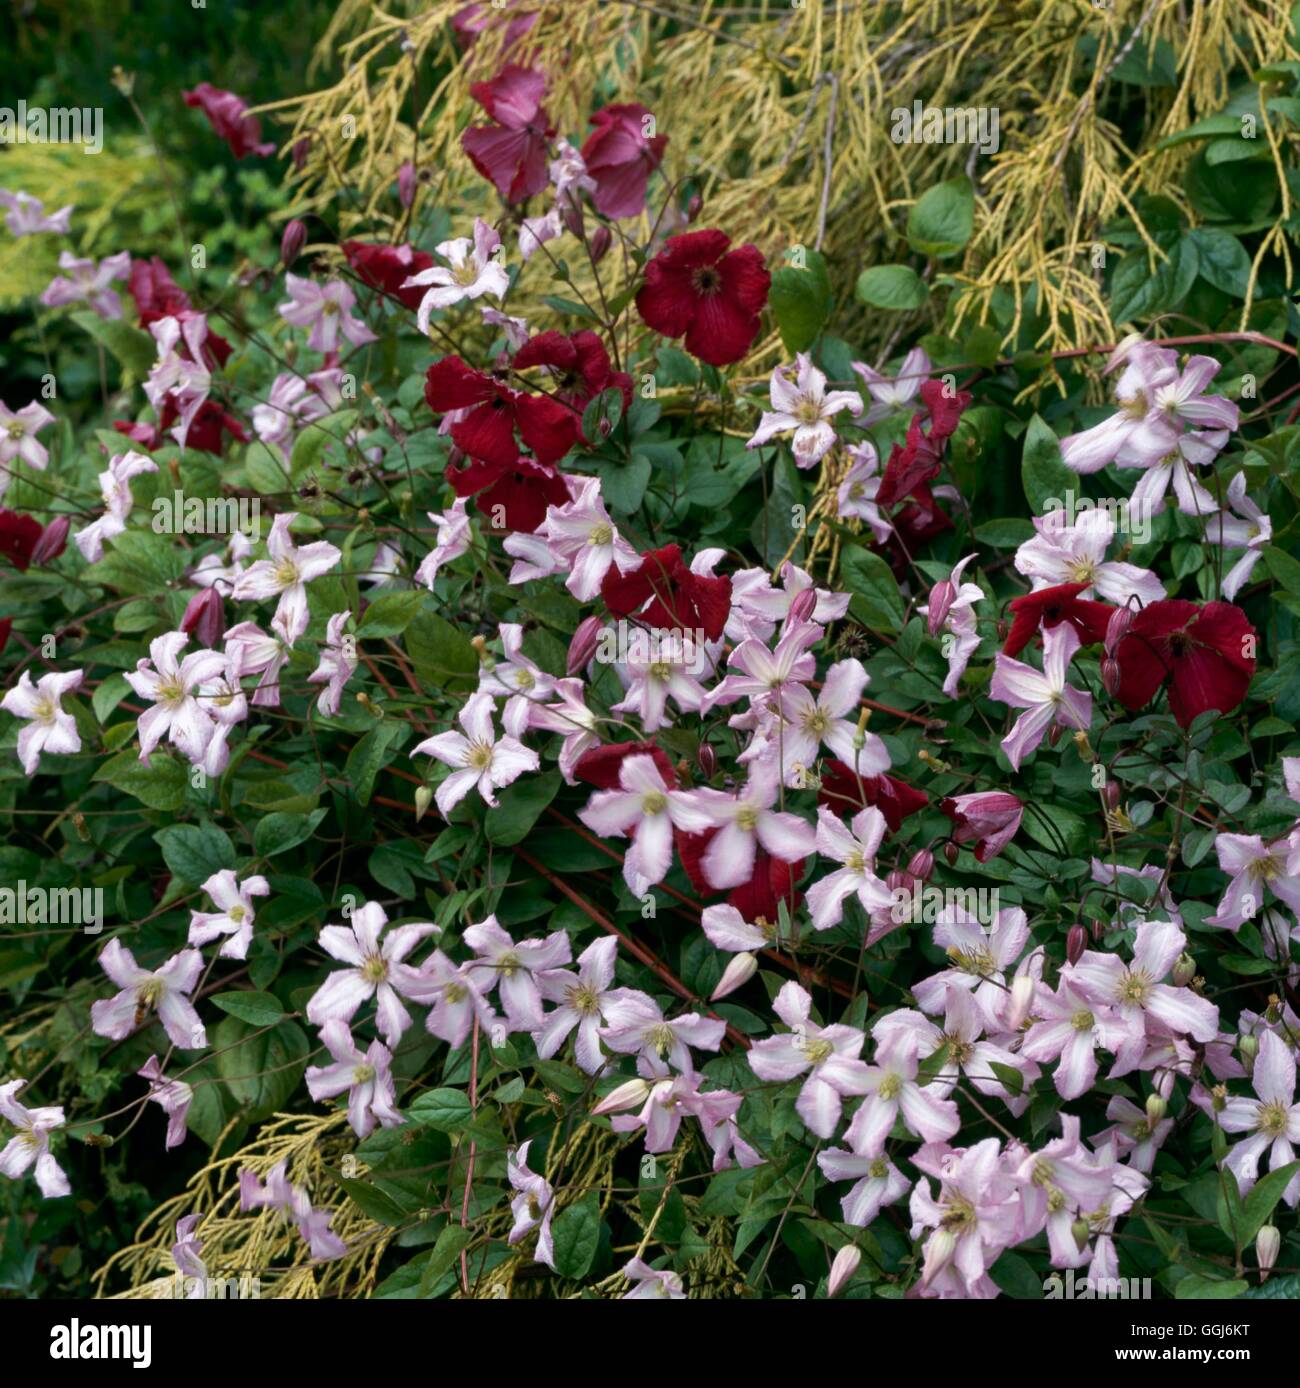 Climbing Gardens - with Clematis 'Little Nell' and Clematis 'Viticella Rubra' growing through a conifer   CLG083880  C Stock Photo